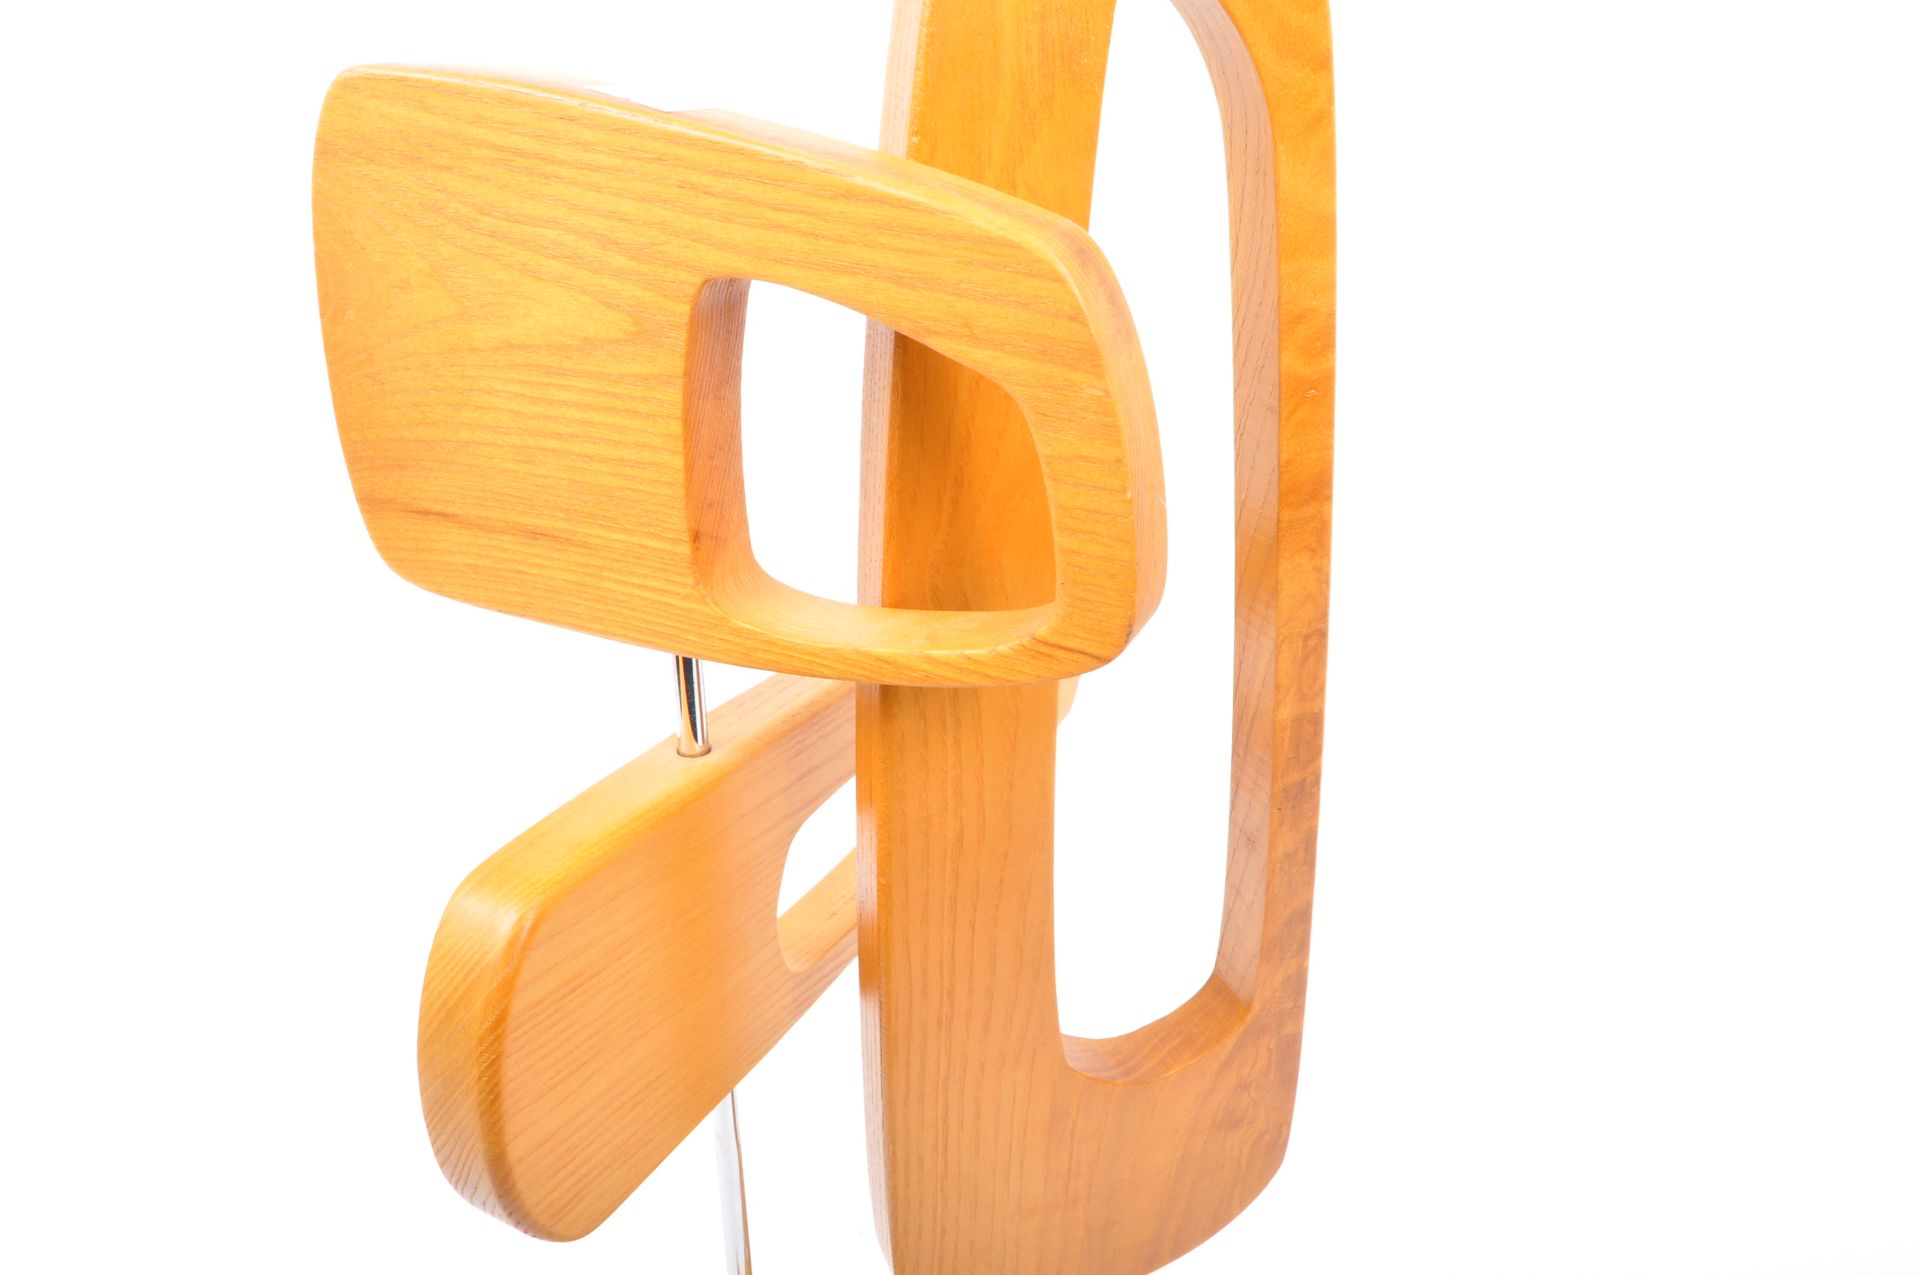 CONTEMPORARY WOODEN ABSTRACT DESK TOP SCULPTURE - Image 3 of 5